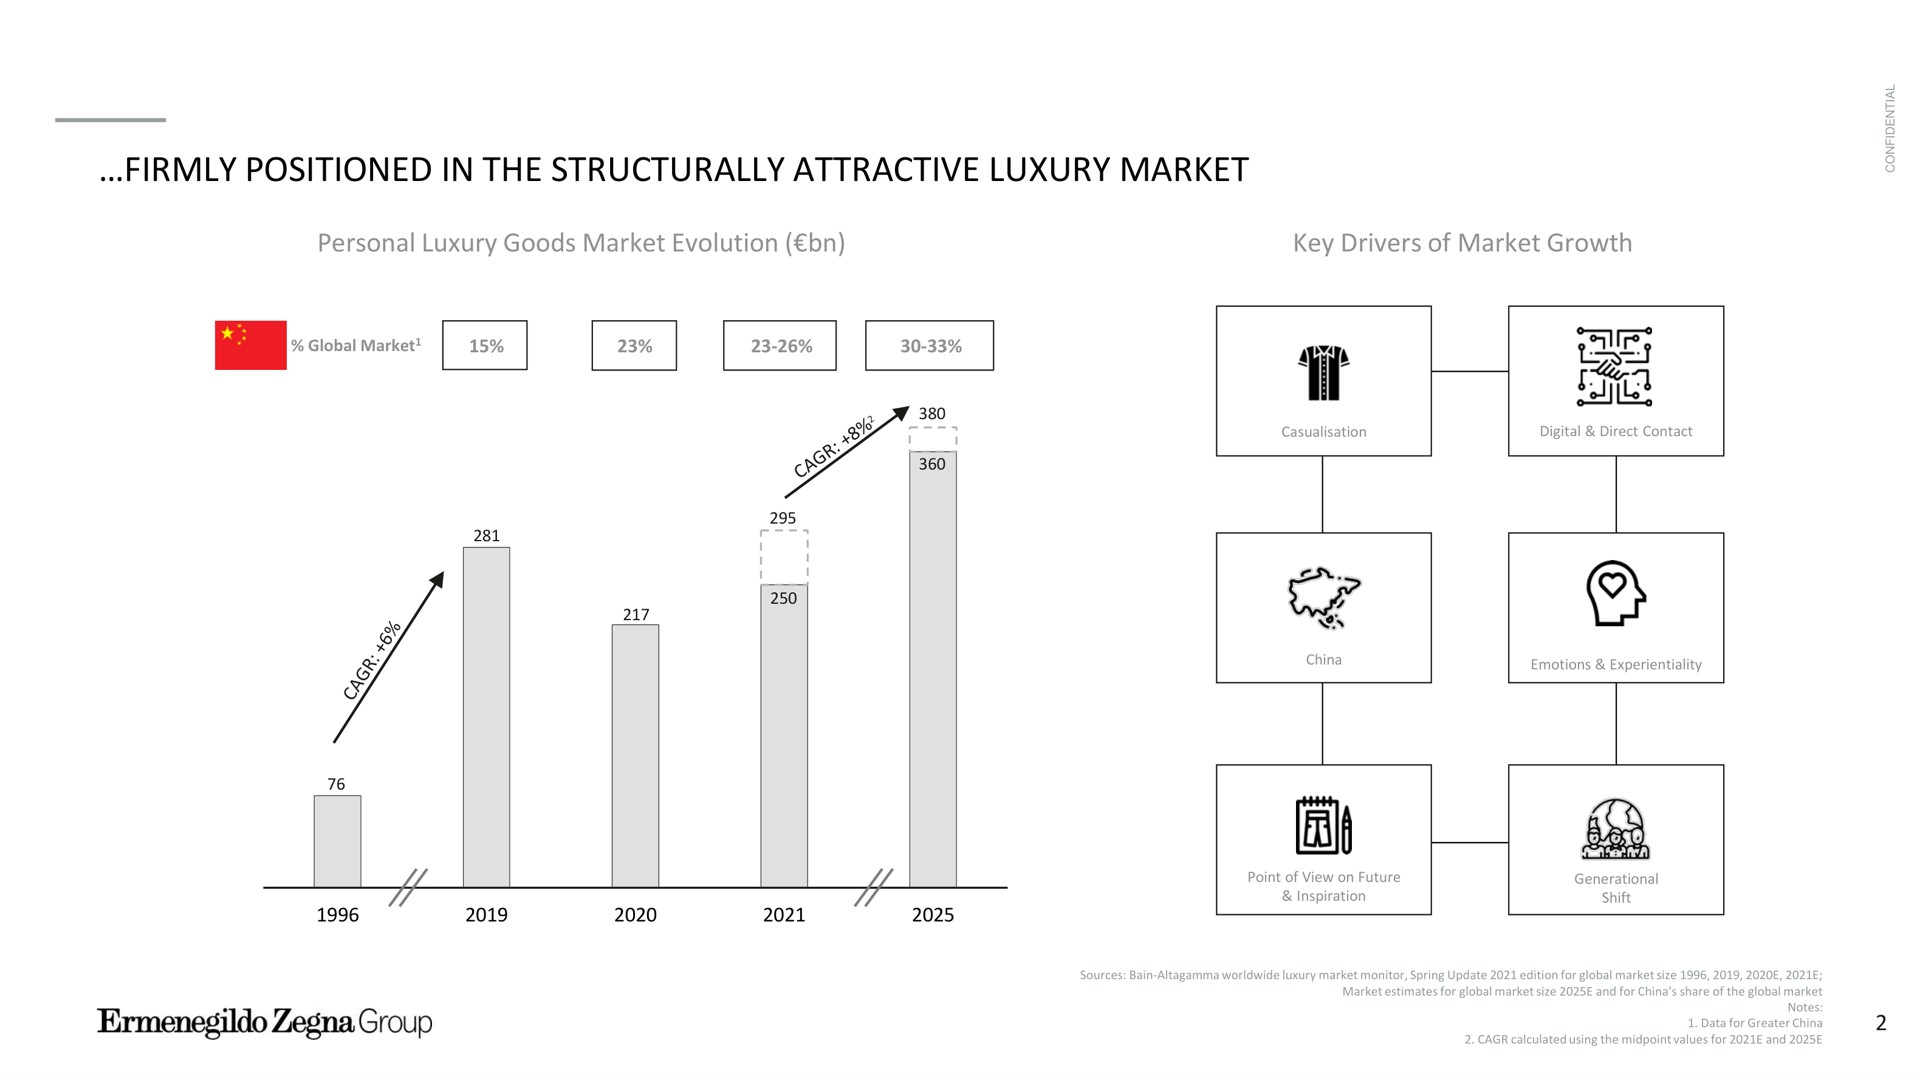 firmly positioned in the structurally attractive luxury market personal luxury goods market evolution key drivers of market growth if lire group | Zegna